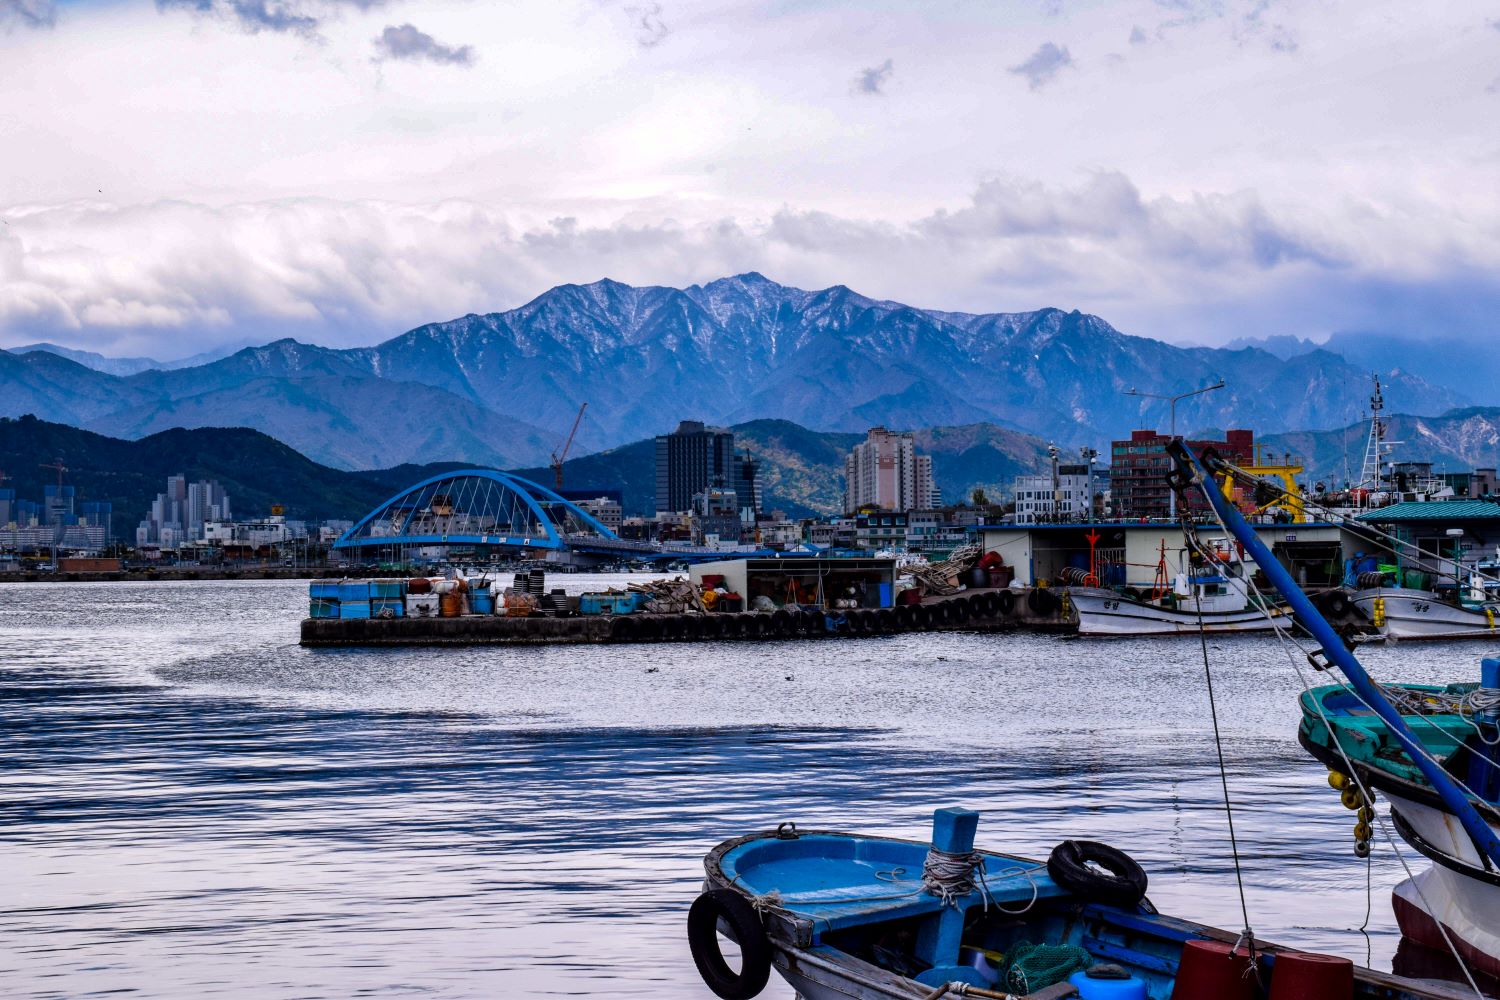 a view of boats on the water and mountains behind them at a port in south korea